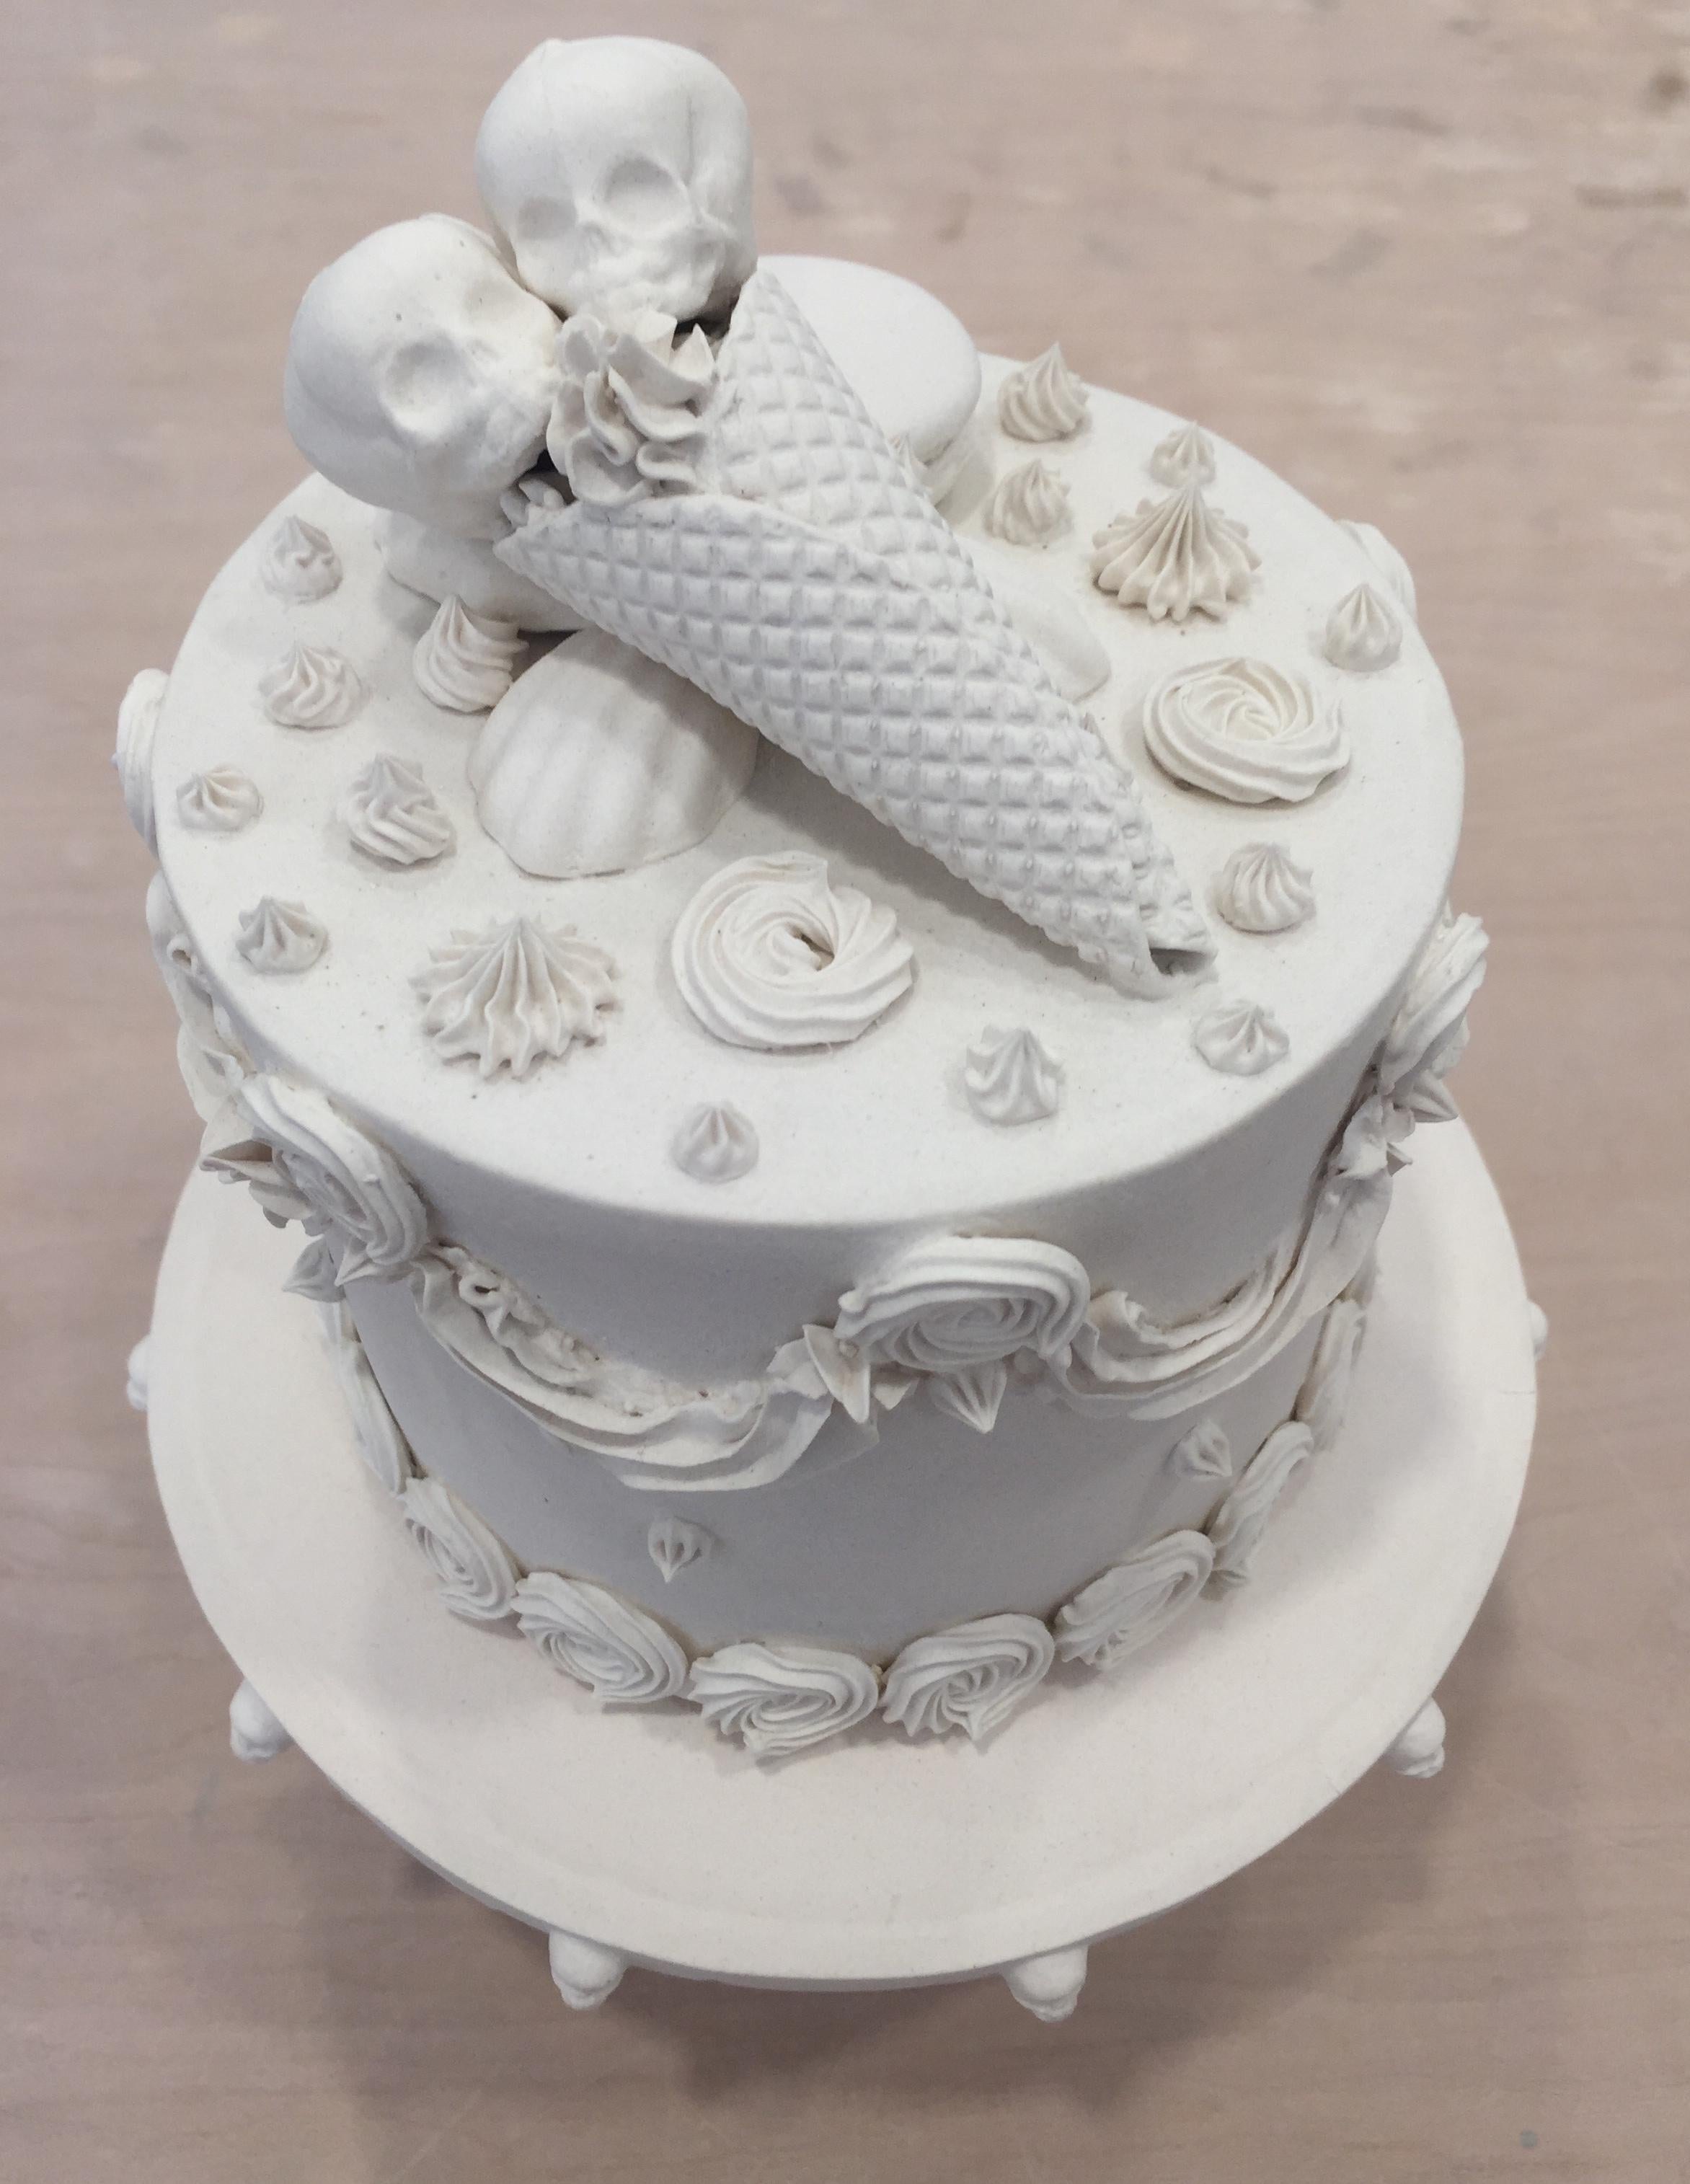 This piece consists of a porcelain slip-casted jar base, intricately topped with slip-casted fetus skulls, donut, and sweets. Decorated with hand piped details and hand rolled sprinkles. Jacqueline Tse channels her love-hate relationship with sugar